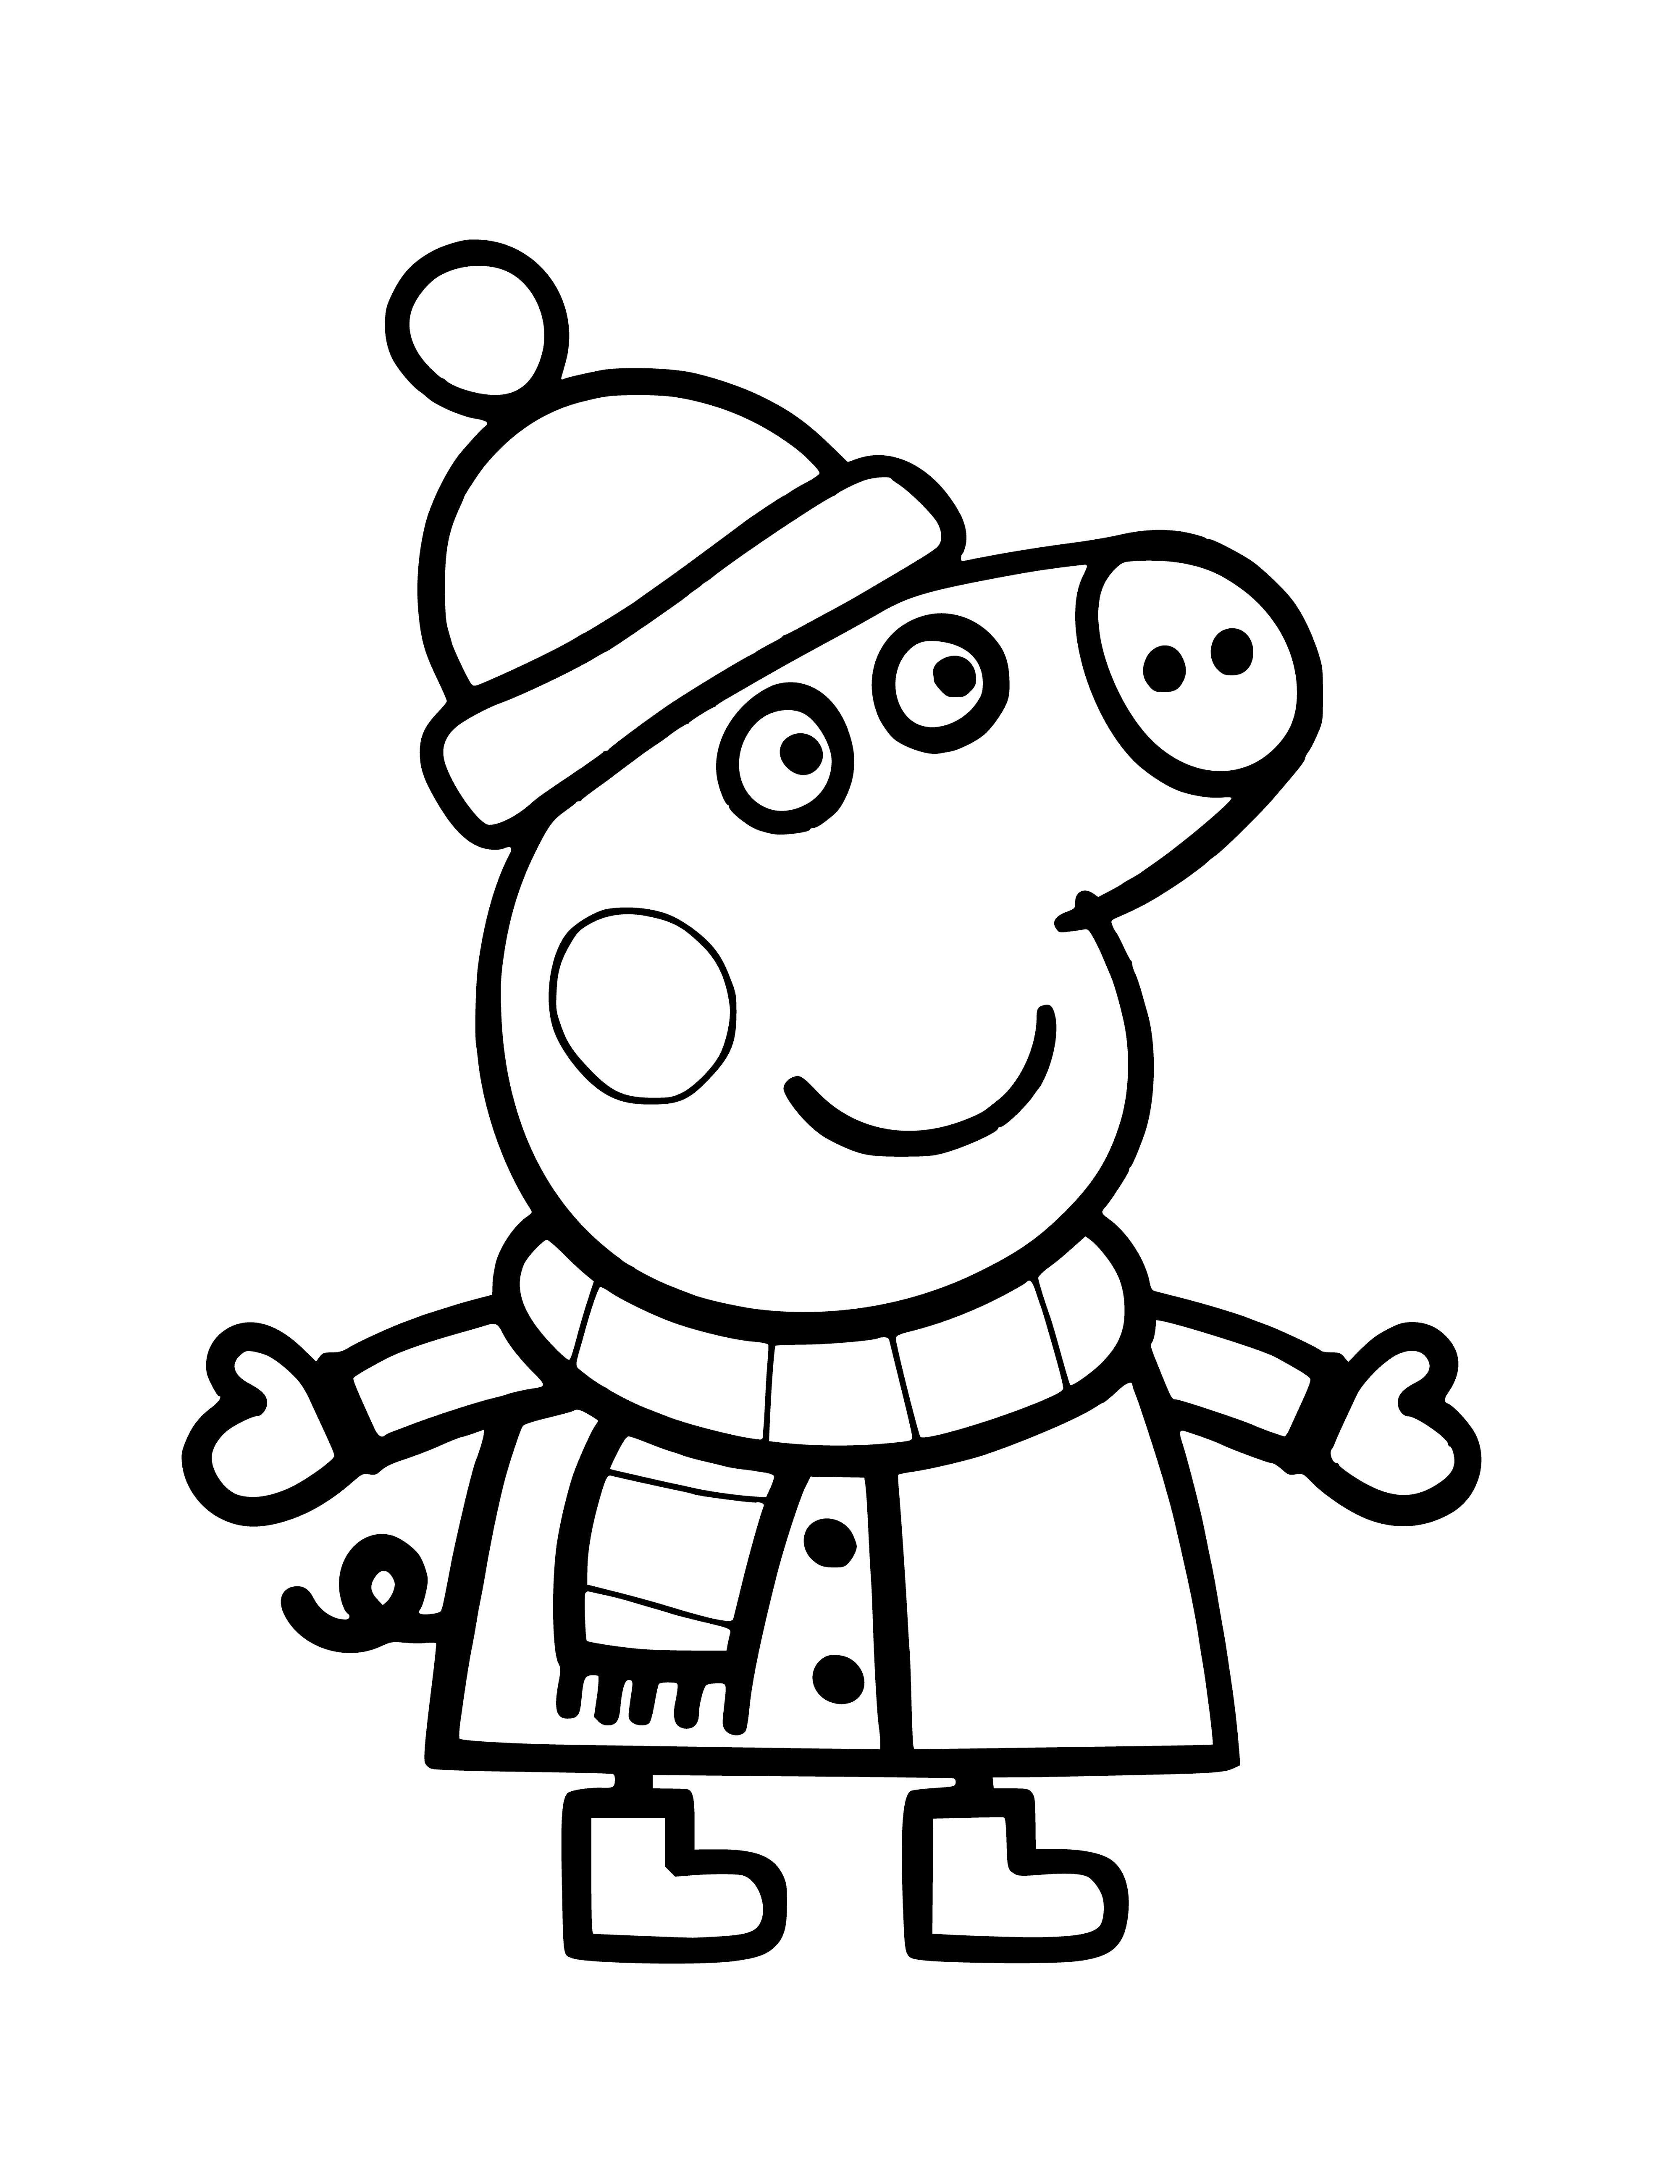 coloring page: Peppa Pig is wearing a red coat, scarf, gloves & boots for winter! #PeppaPig #WinterFashion